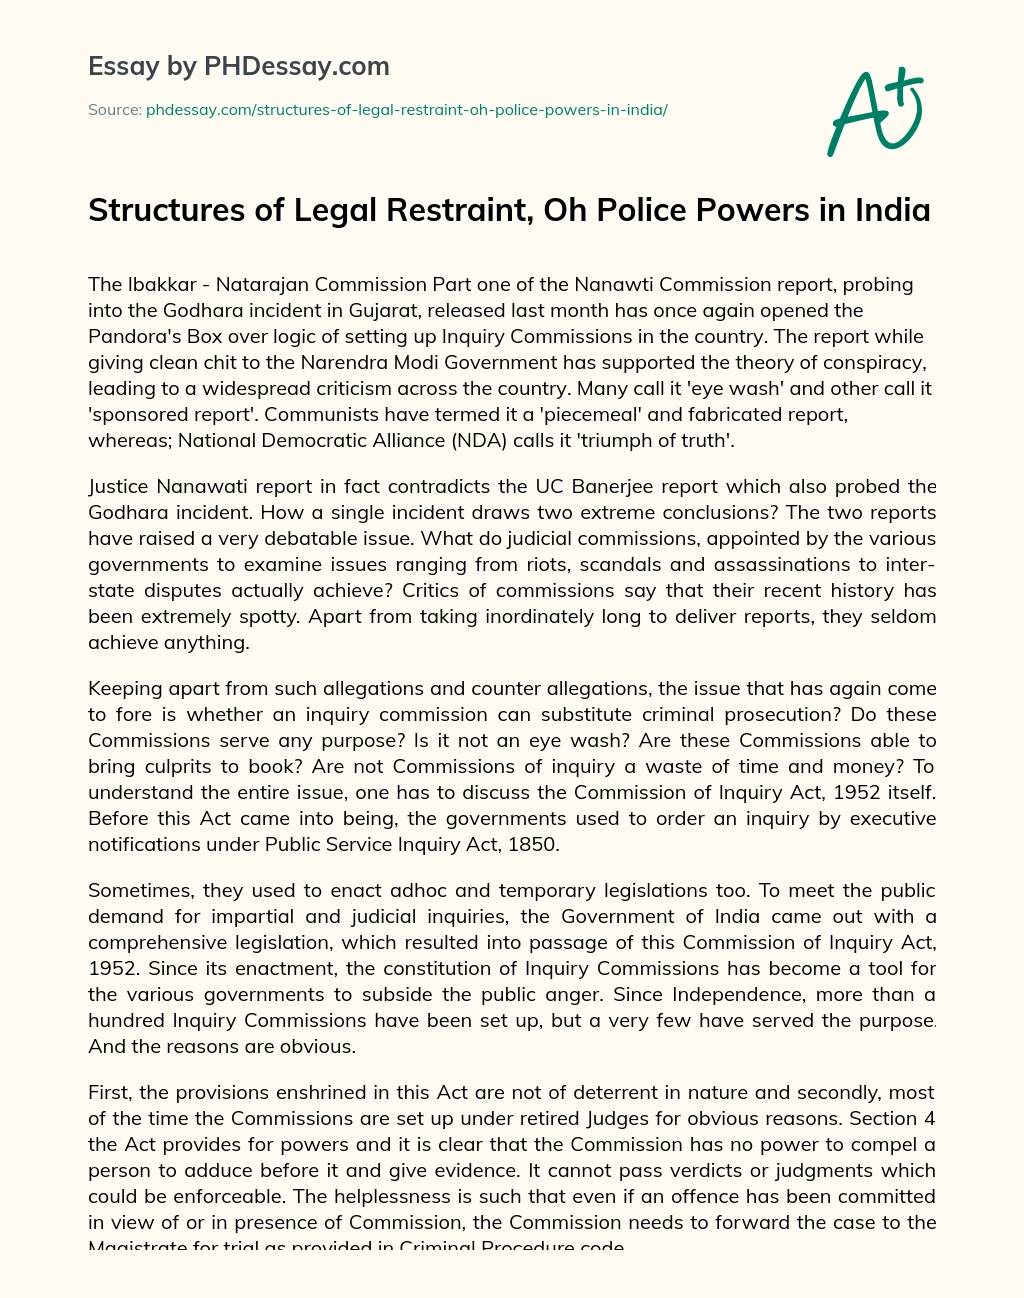 Structures of Legal Restraint, Oh Police Powers in India essay